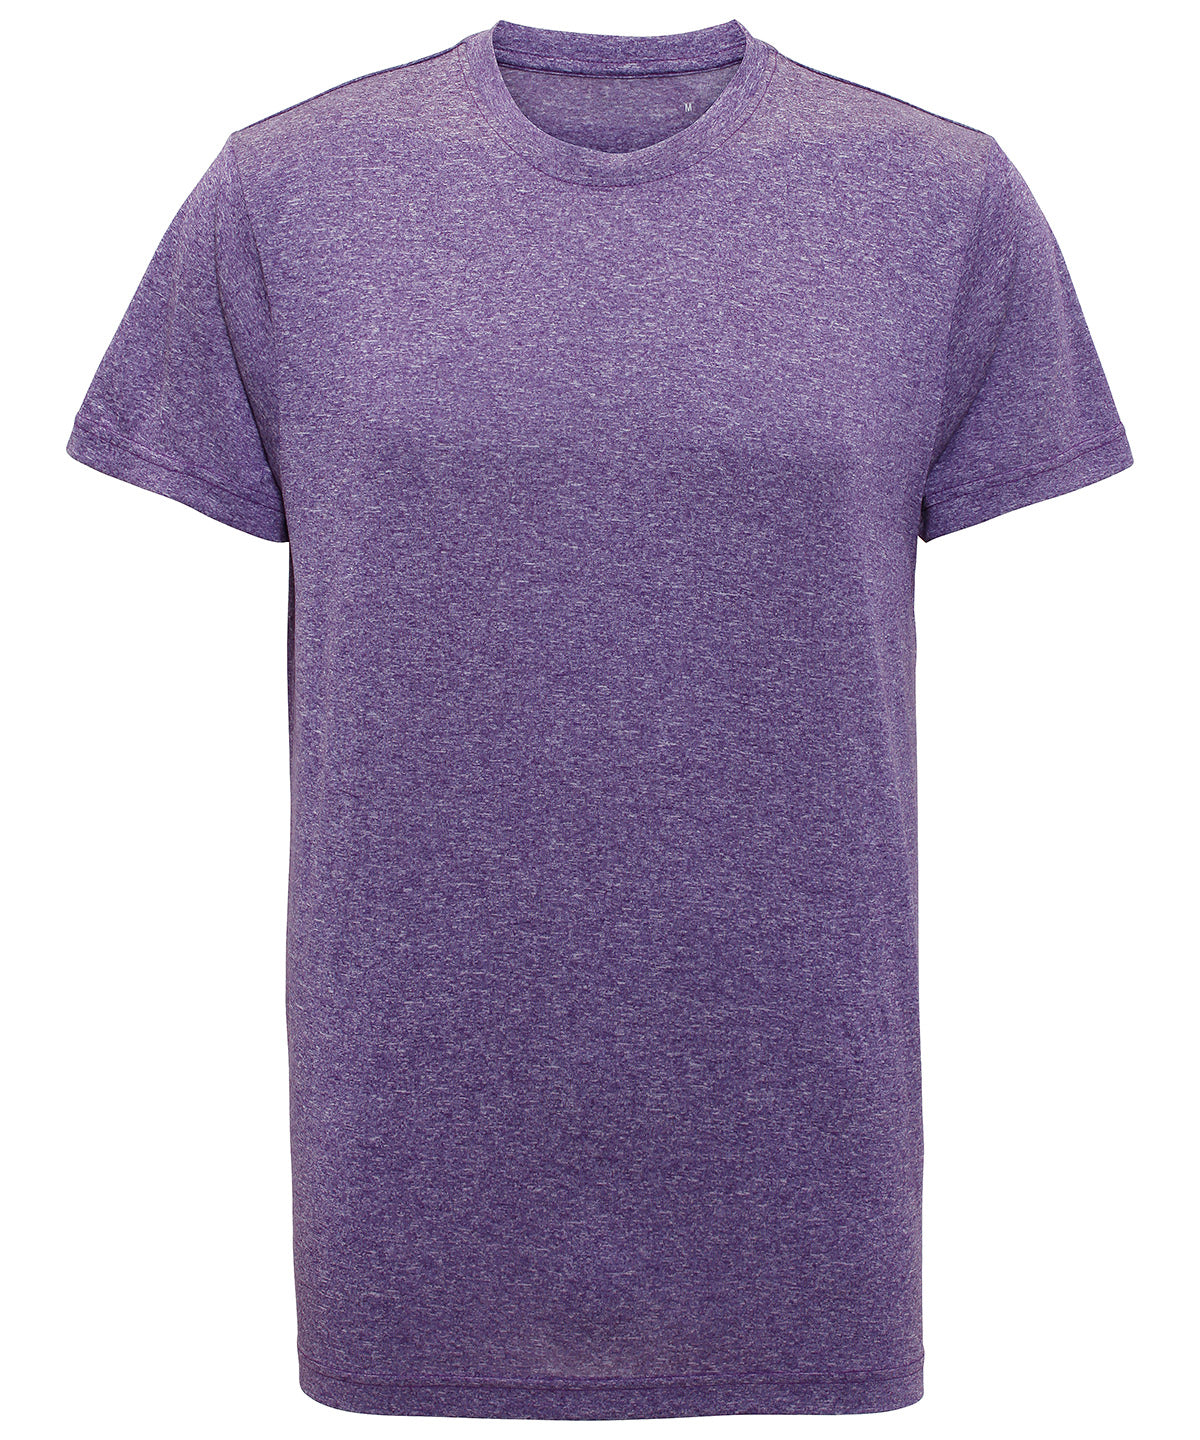 Purple Melange - TriDri® performance t-shirt T-Shirts TriDri® Activewear & Performance, Athleisurewear, Back to the Gym, Exclusives, Gymwear, Must Haves, New Colours For 2022, Outdoor Sports, Plus Sizes, Rebrandable, Sports & Leisure, T-Shirts & Vests, Team Sportswear, UPF Protection Schoolwear Centres